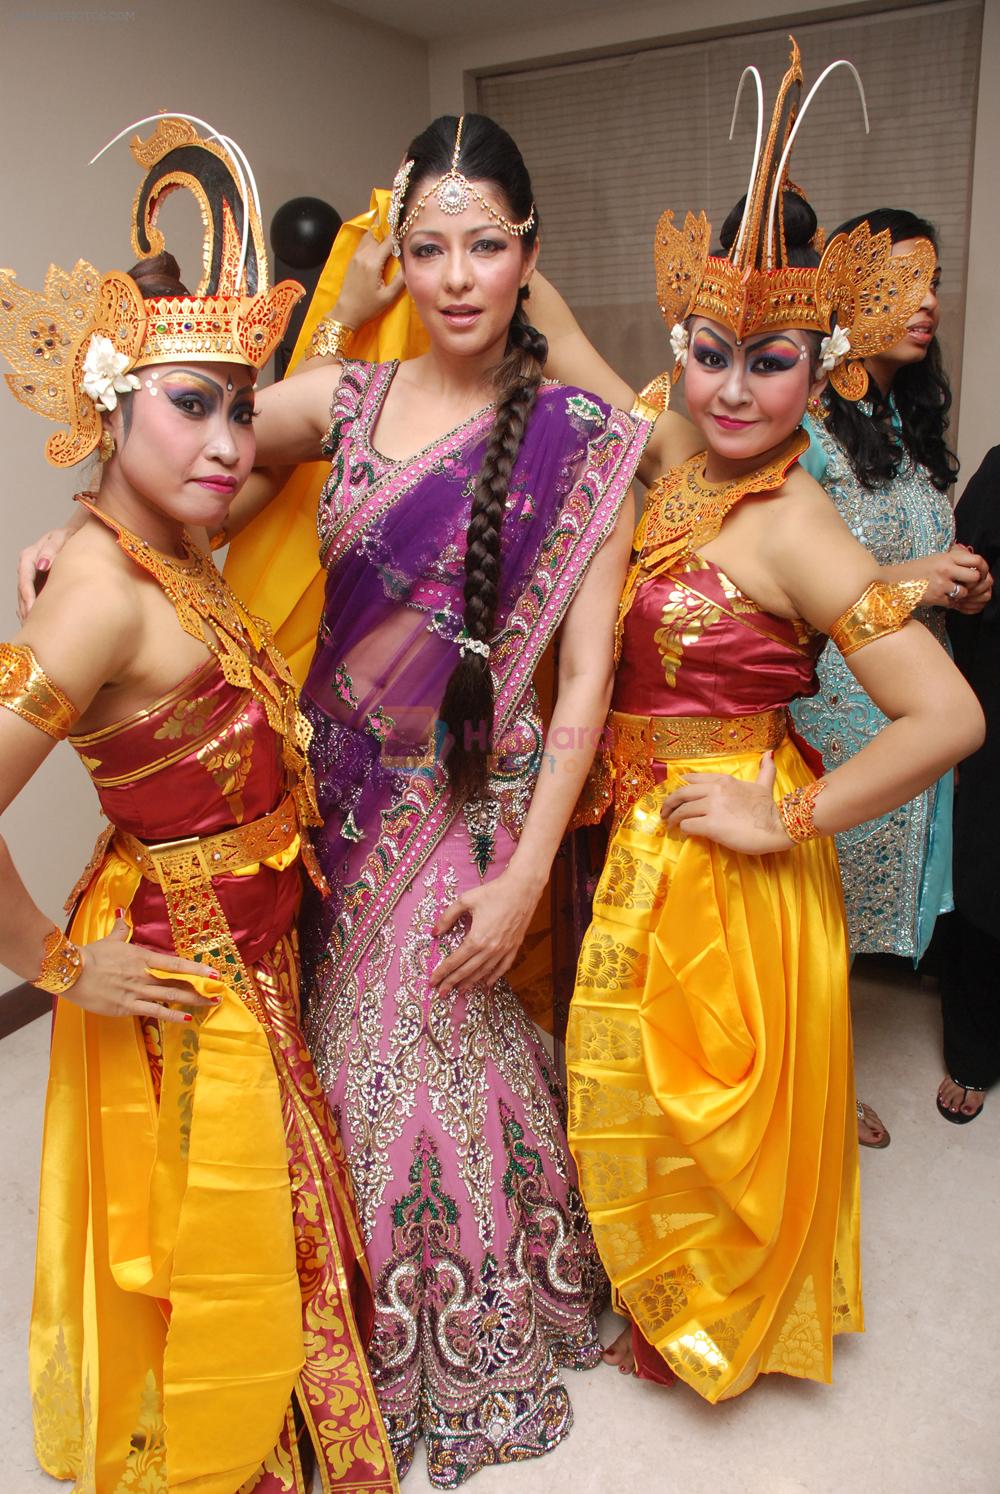 Aditi Govitrikar with the balinese dancers from Vedic Spa Mantra at SHAM-E-AWADH Celebrate this festive season in Awadhi Style in Vedic Spa Mantra on 26th Oct 2012